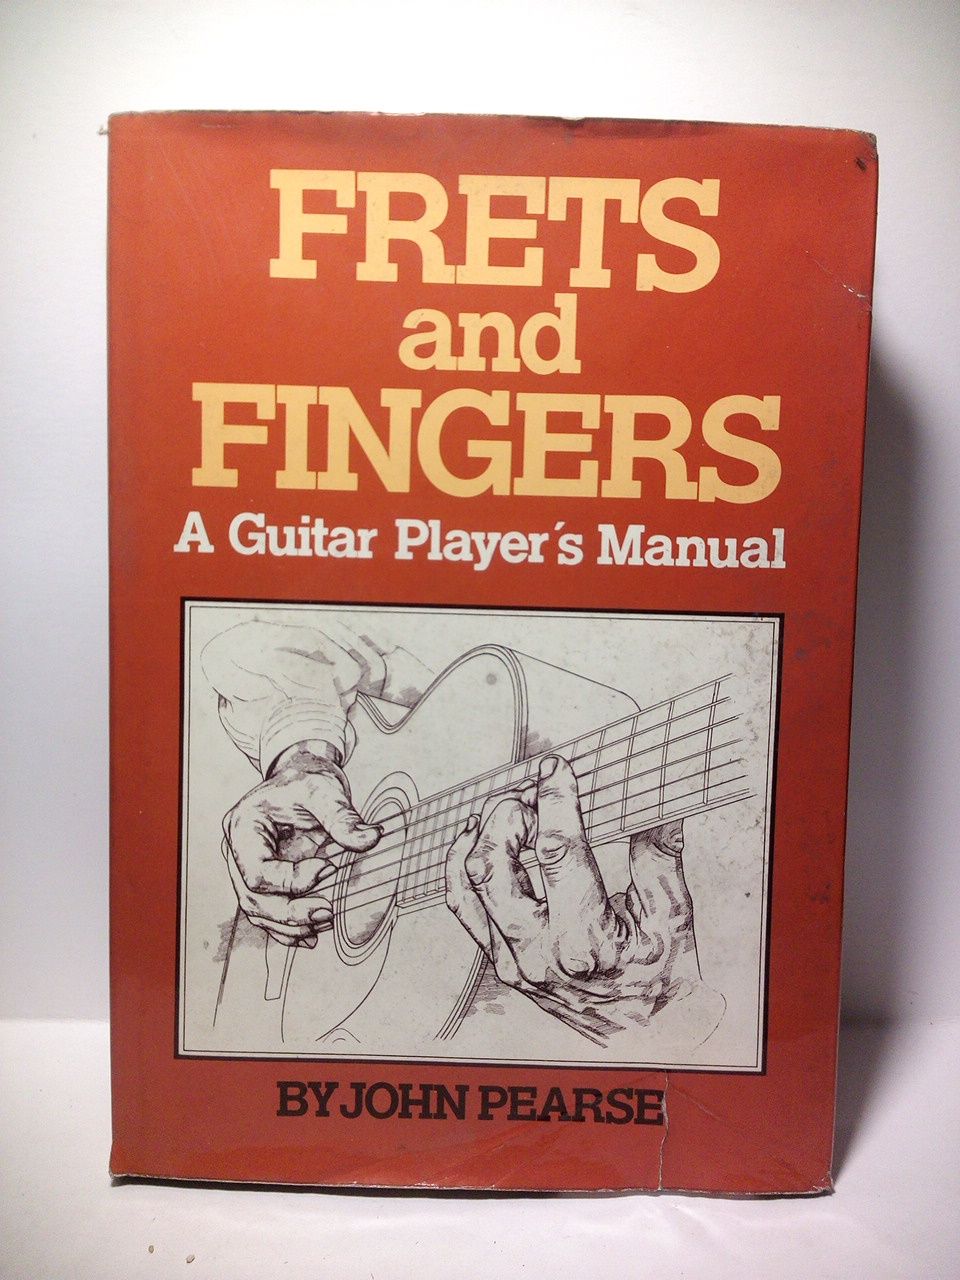 PEARSE, John - Frets and Fingers: A Guitar Player's Manual